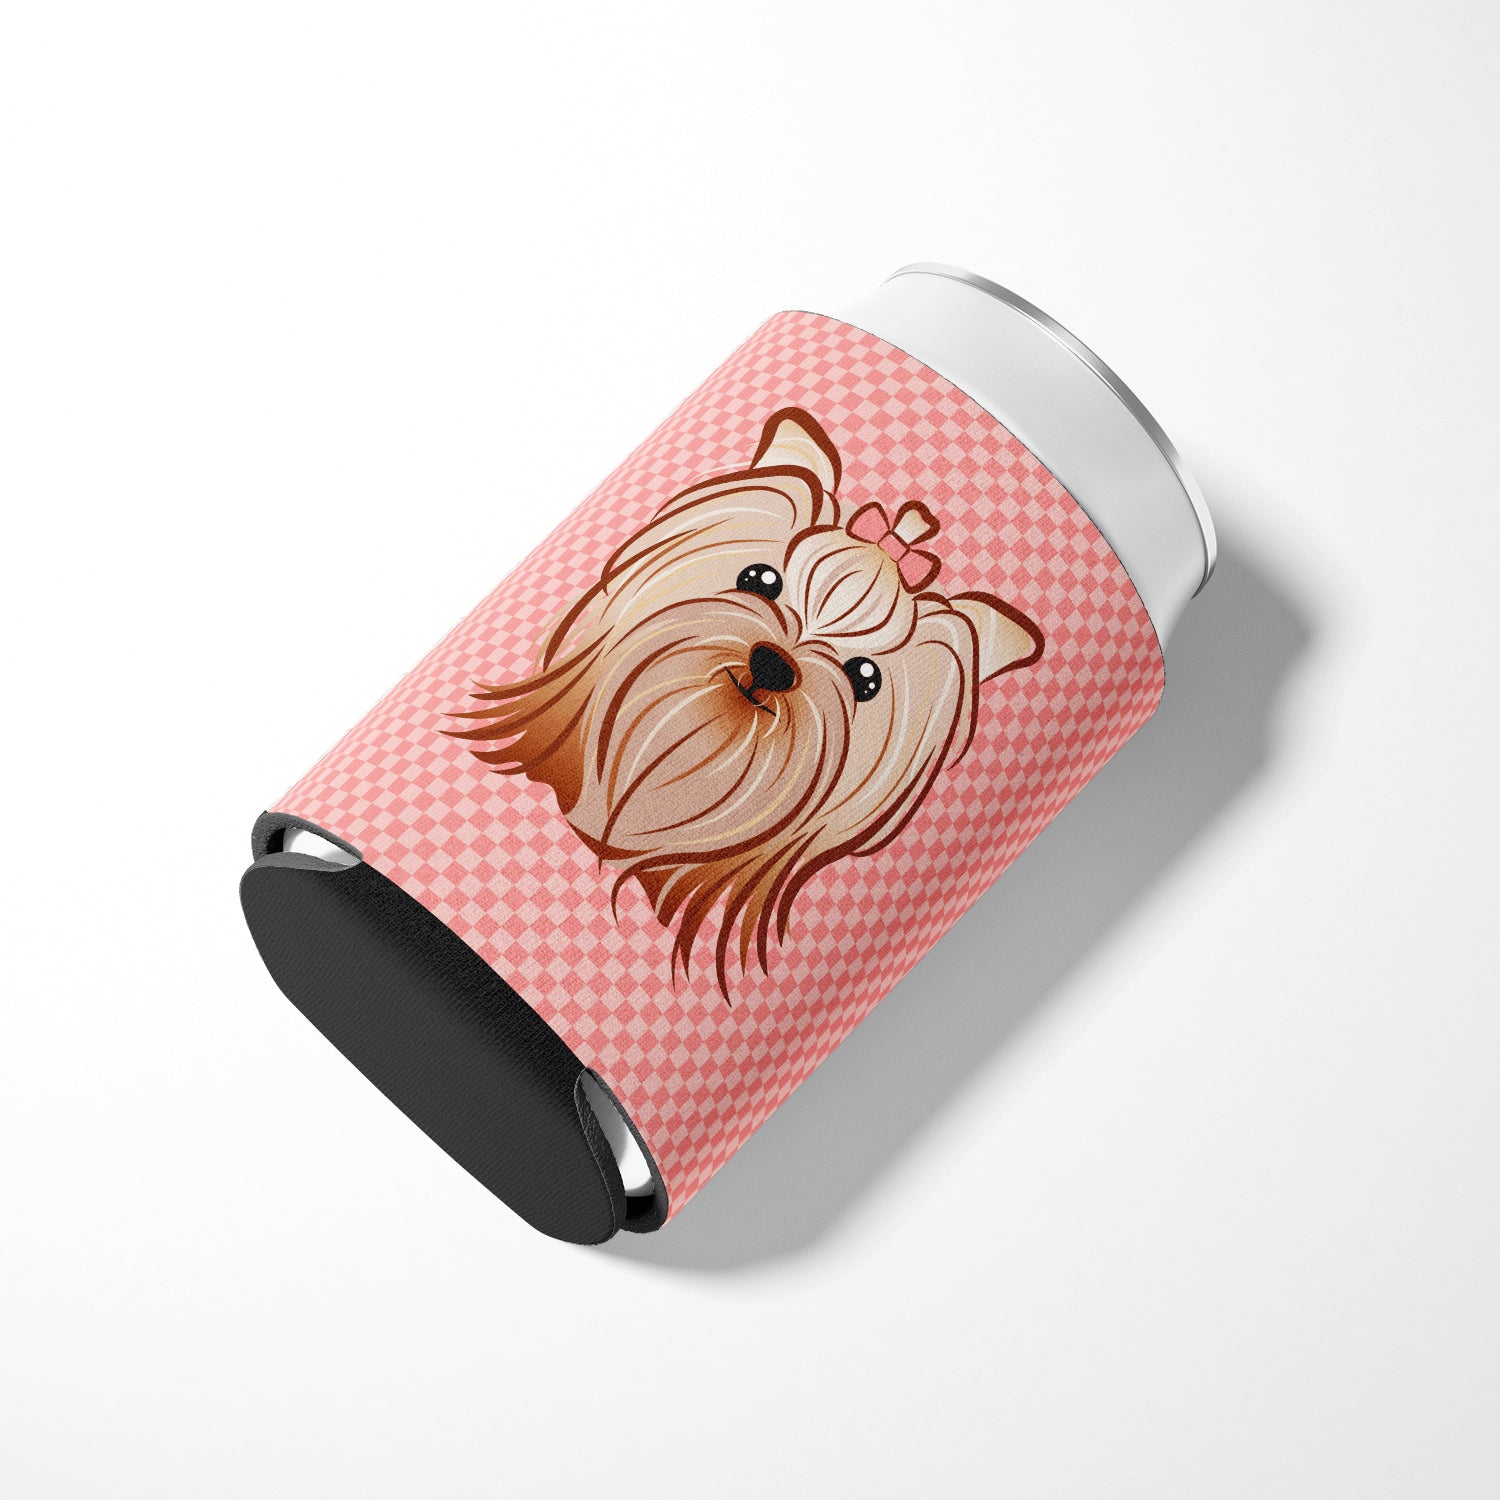 Pink Checkered Yorkie / Yorkshire Terrier Can or Bottle Hugger BB1138CC.